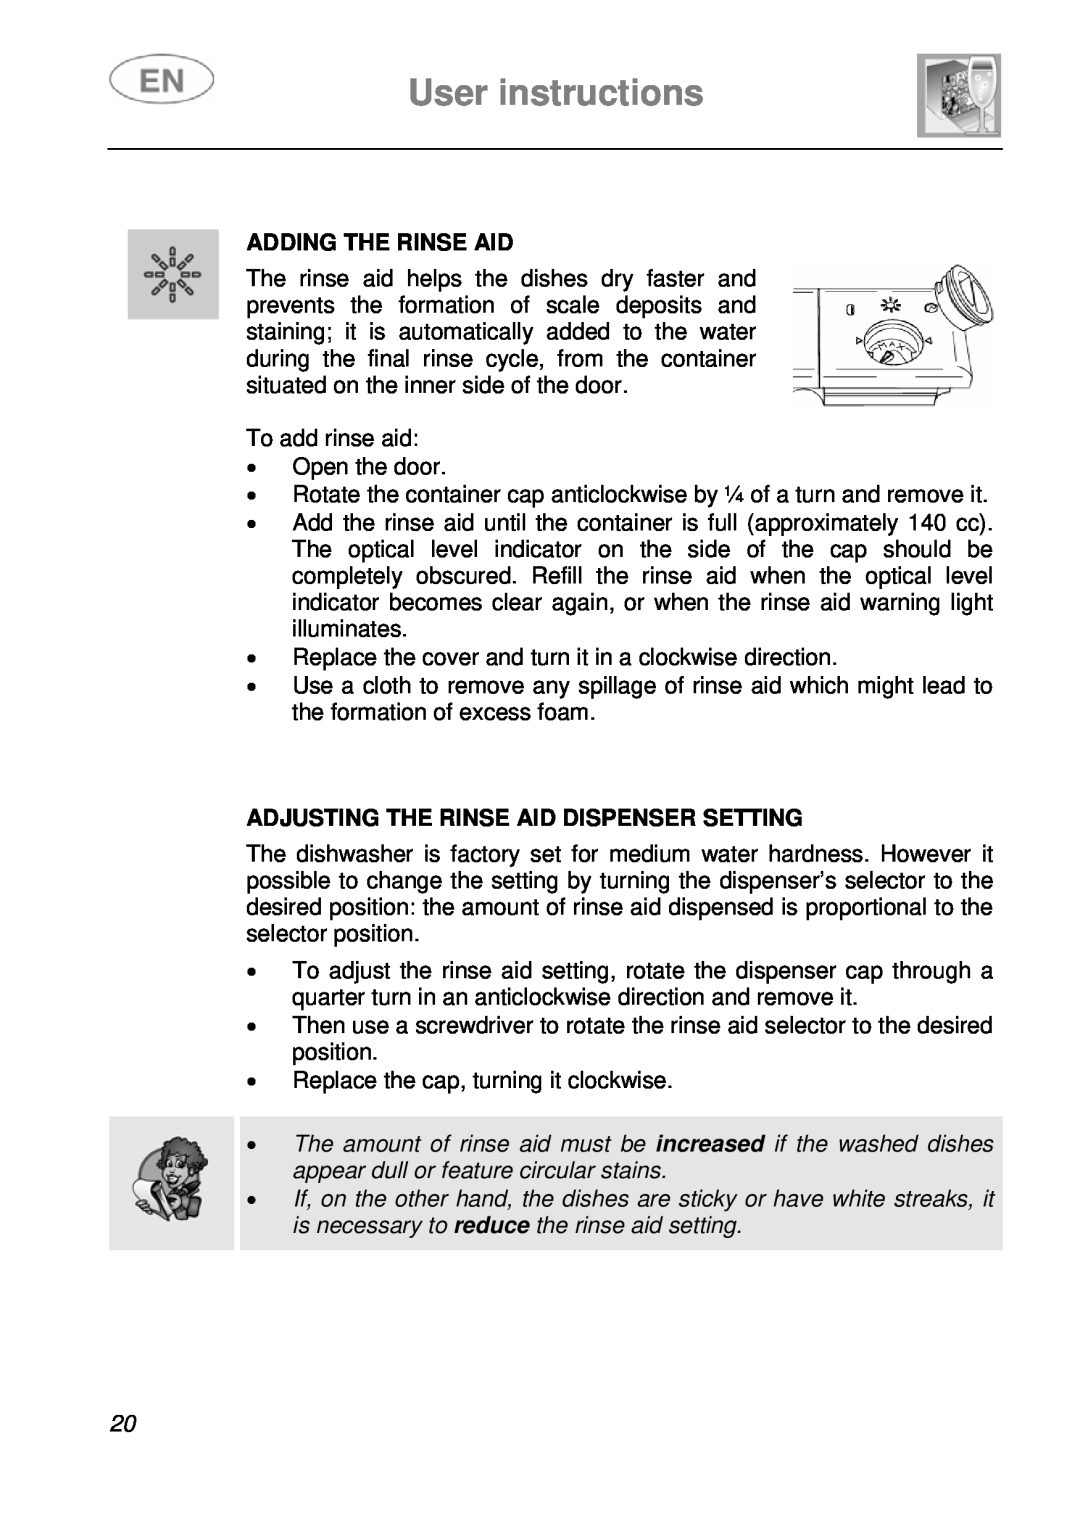 Smeg LSA14X7 instruction manual User instructions, Adding The Rinse Aid, Adjusting The Rinse Aid Dispenser Setting 